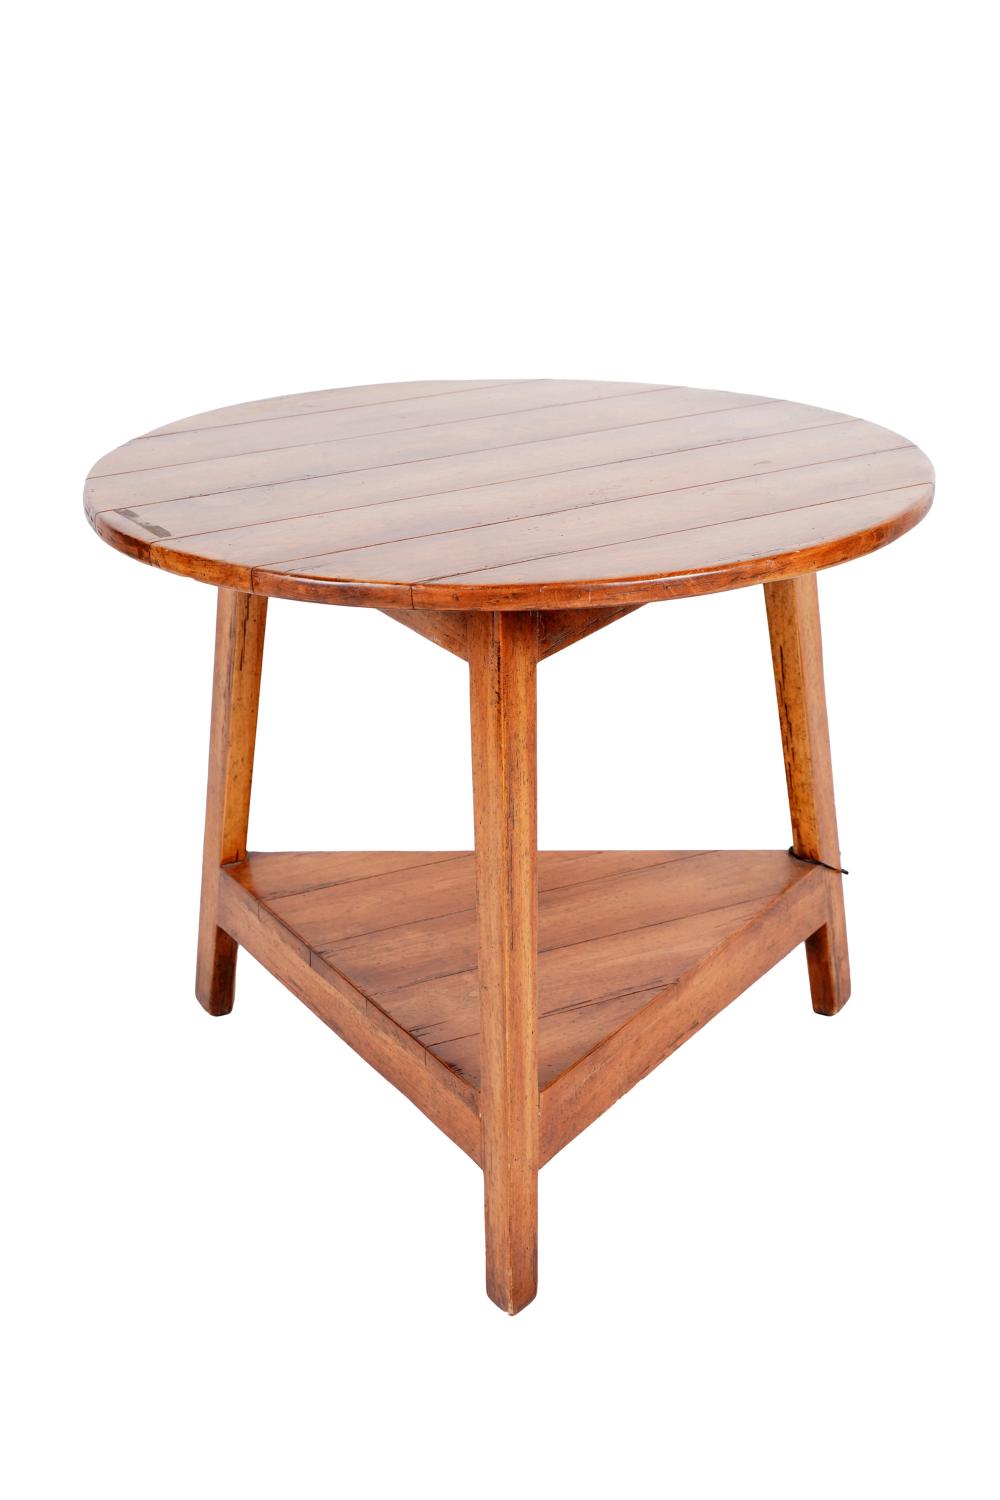 FRUITWOOD CRICKET TABLElate 20th 33493a